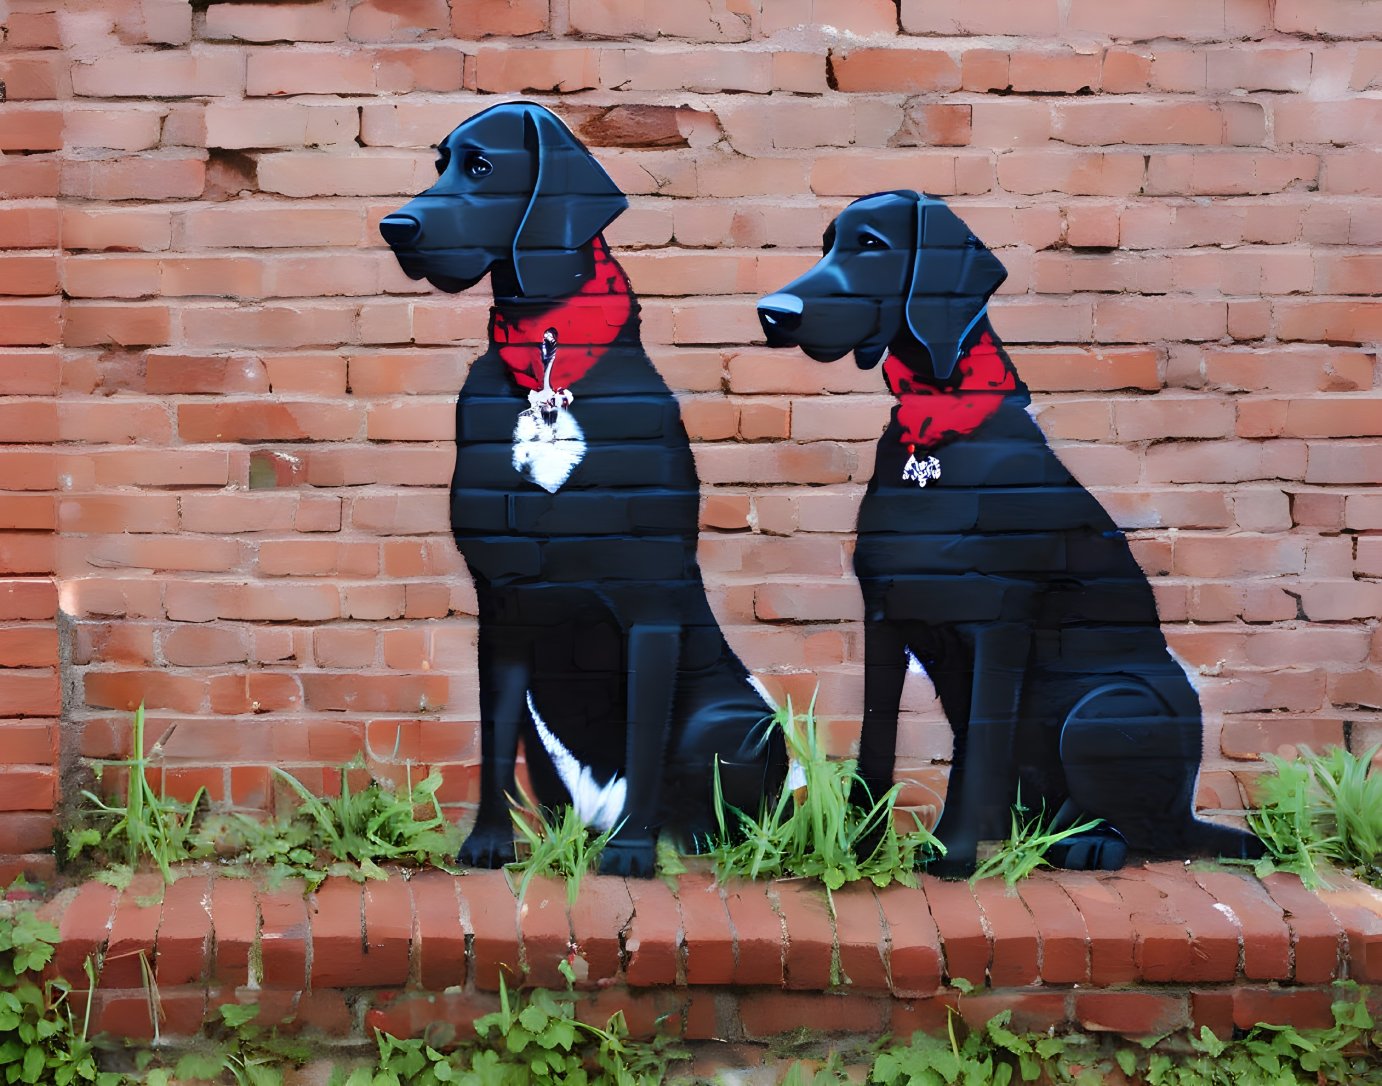 Black Dog Silhouettes with Red Bandanas on Brick Wall with Greenery